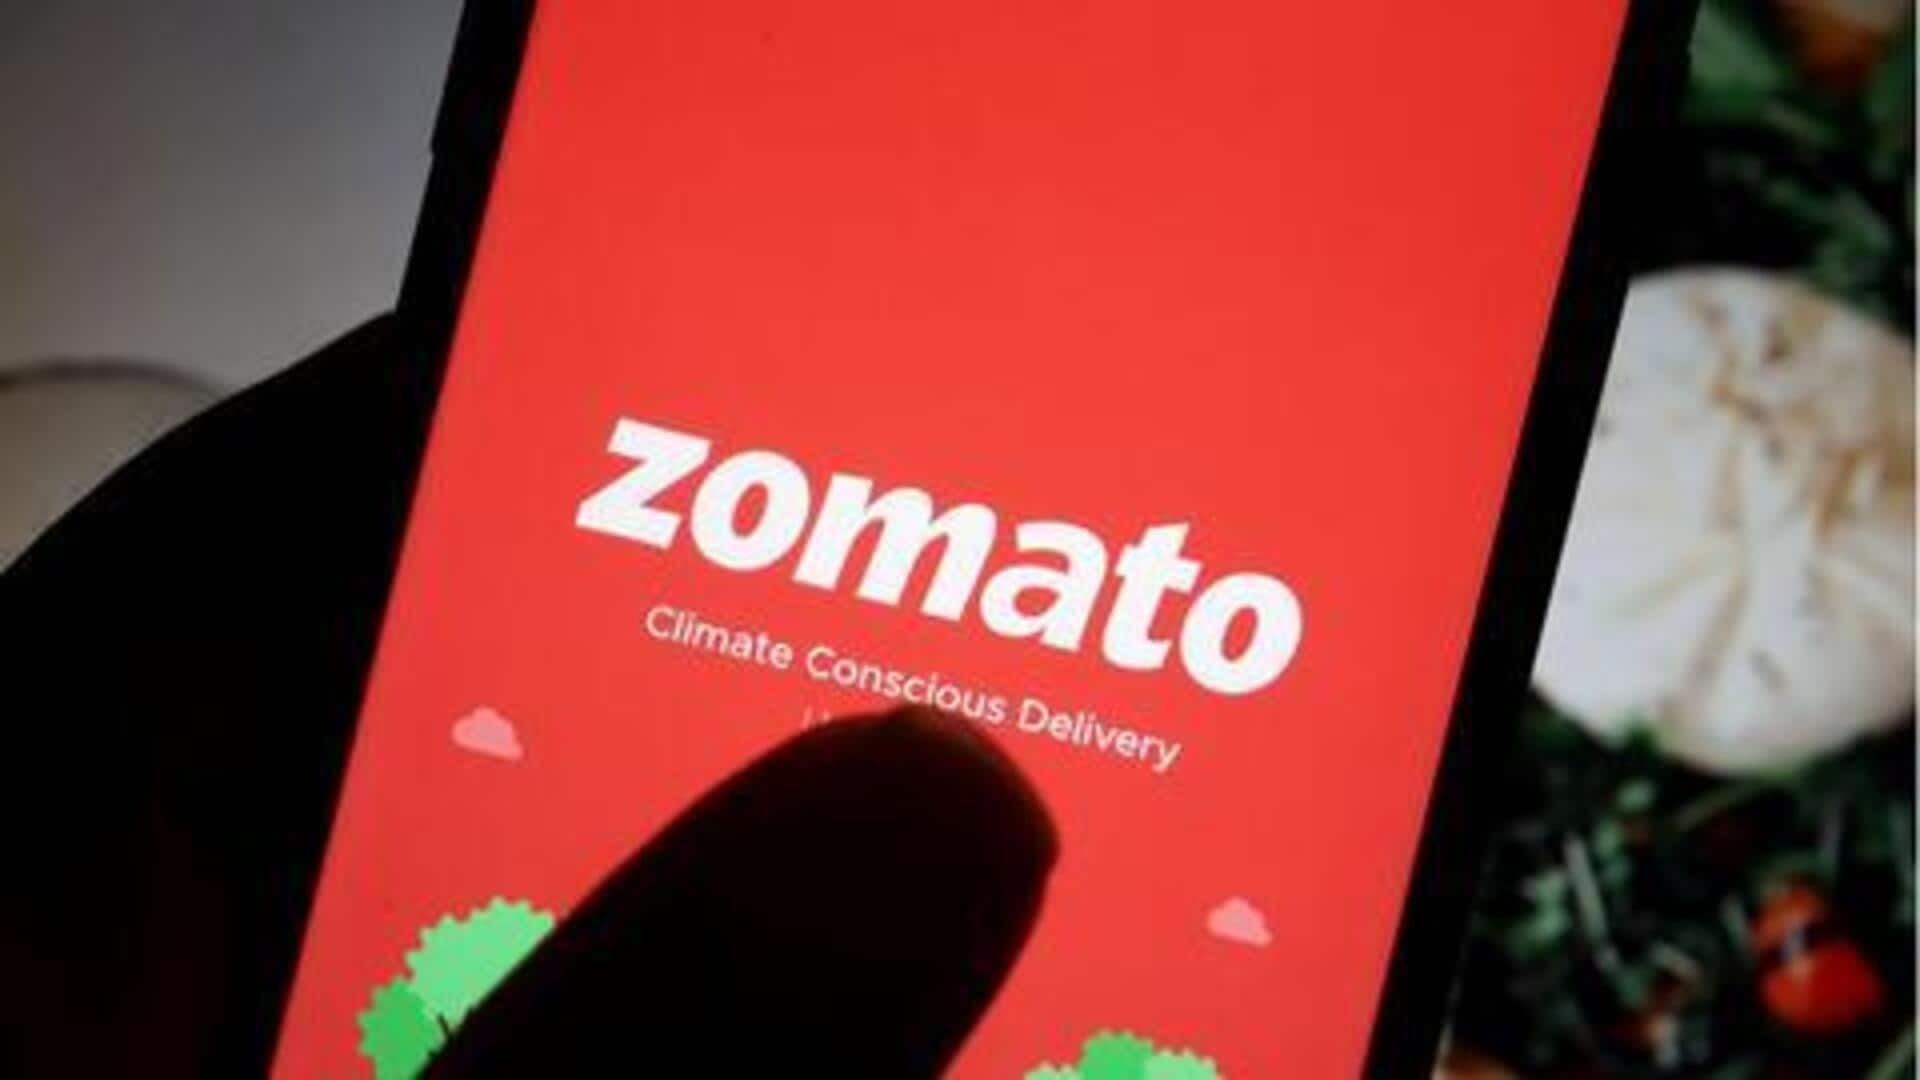 Zomato in discussions with NBFCs to provide loans to restaurants